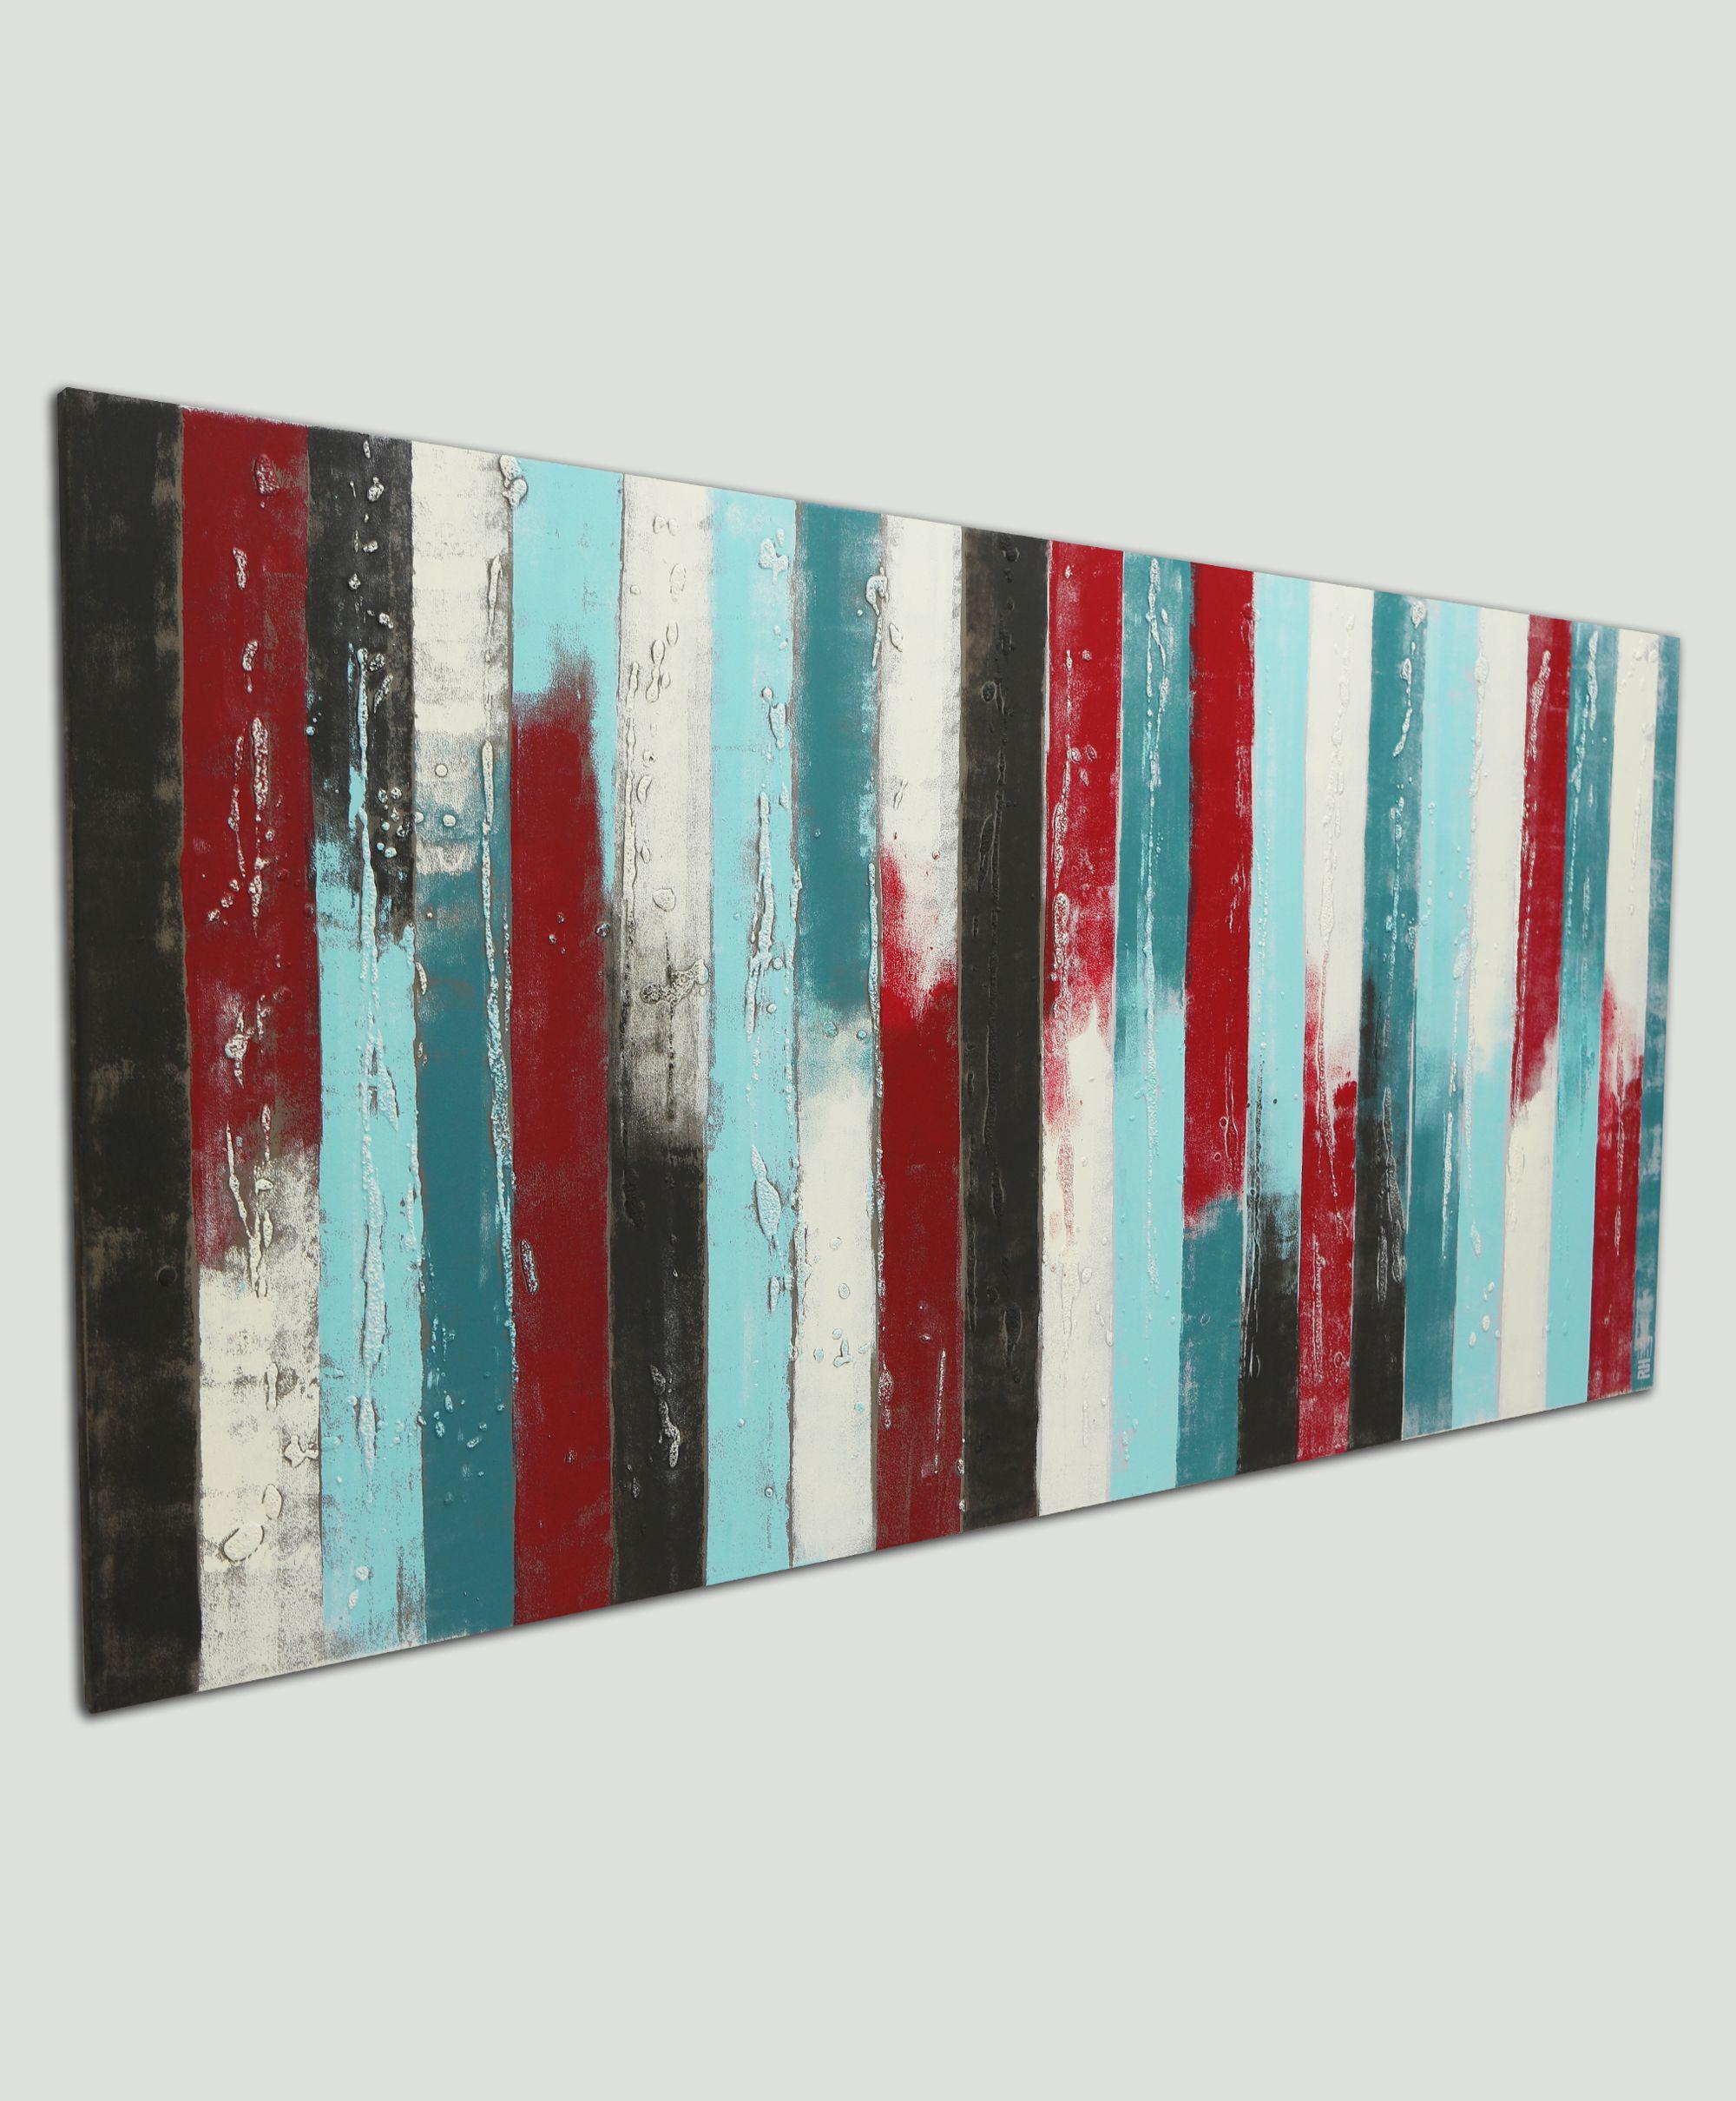 XL Acrylic Abstract Painting, Original artwork created by Ronald Hunter.    One of Ronaldâ€™s favourite artworks is the â€˜Panelsâ€™ serie, this idea came from a huge table he used to work on with large wooden panels. Through multiple layers of